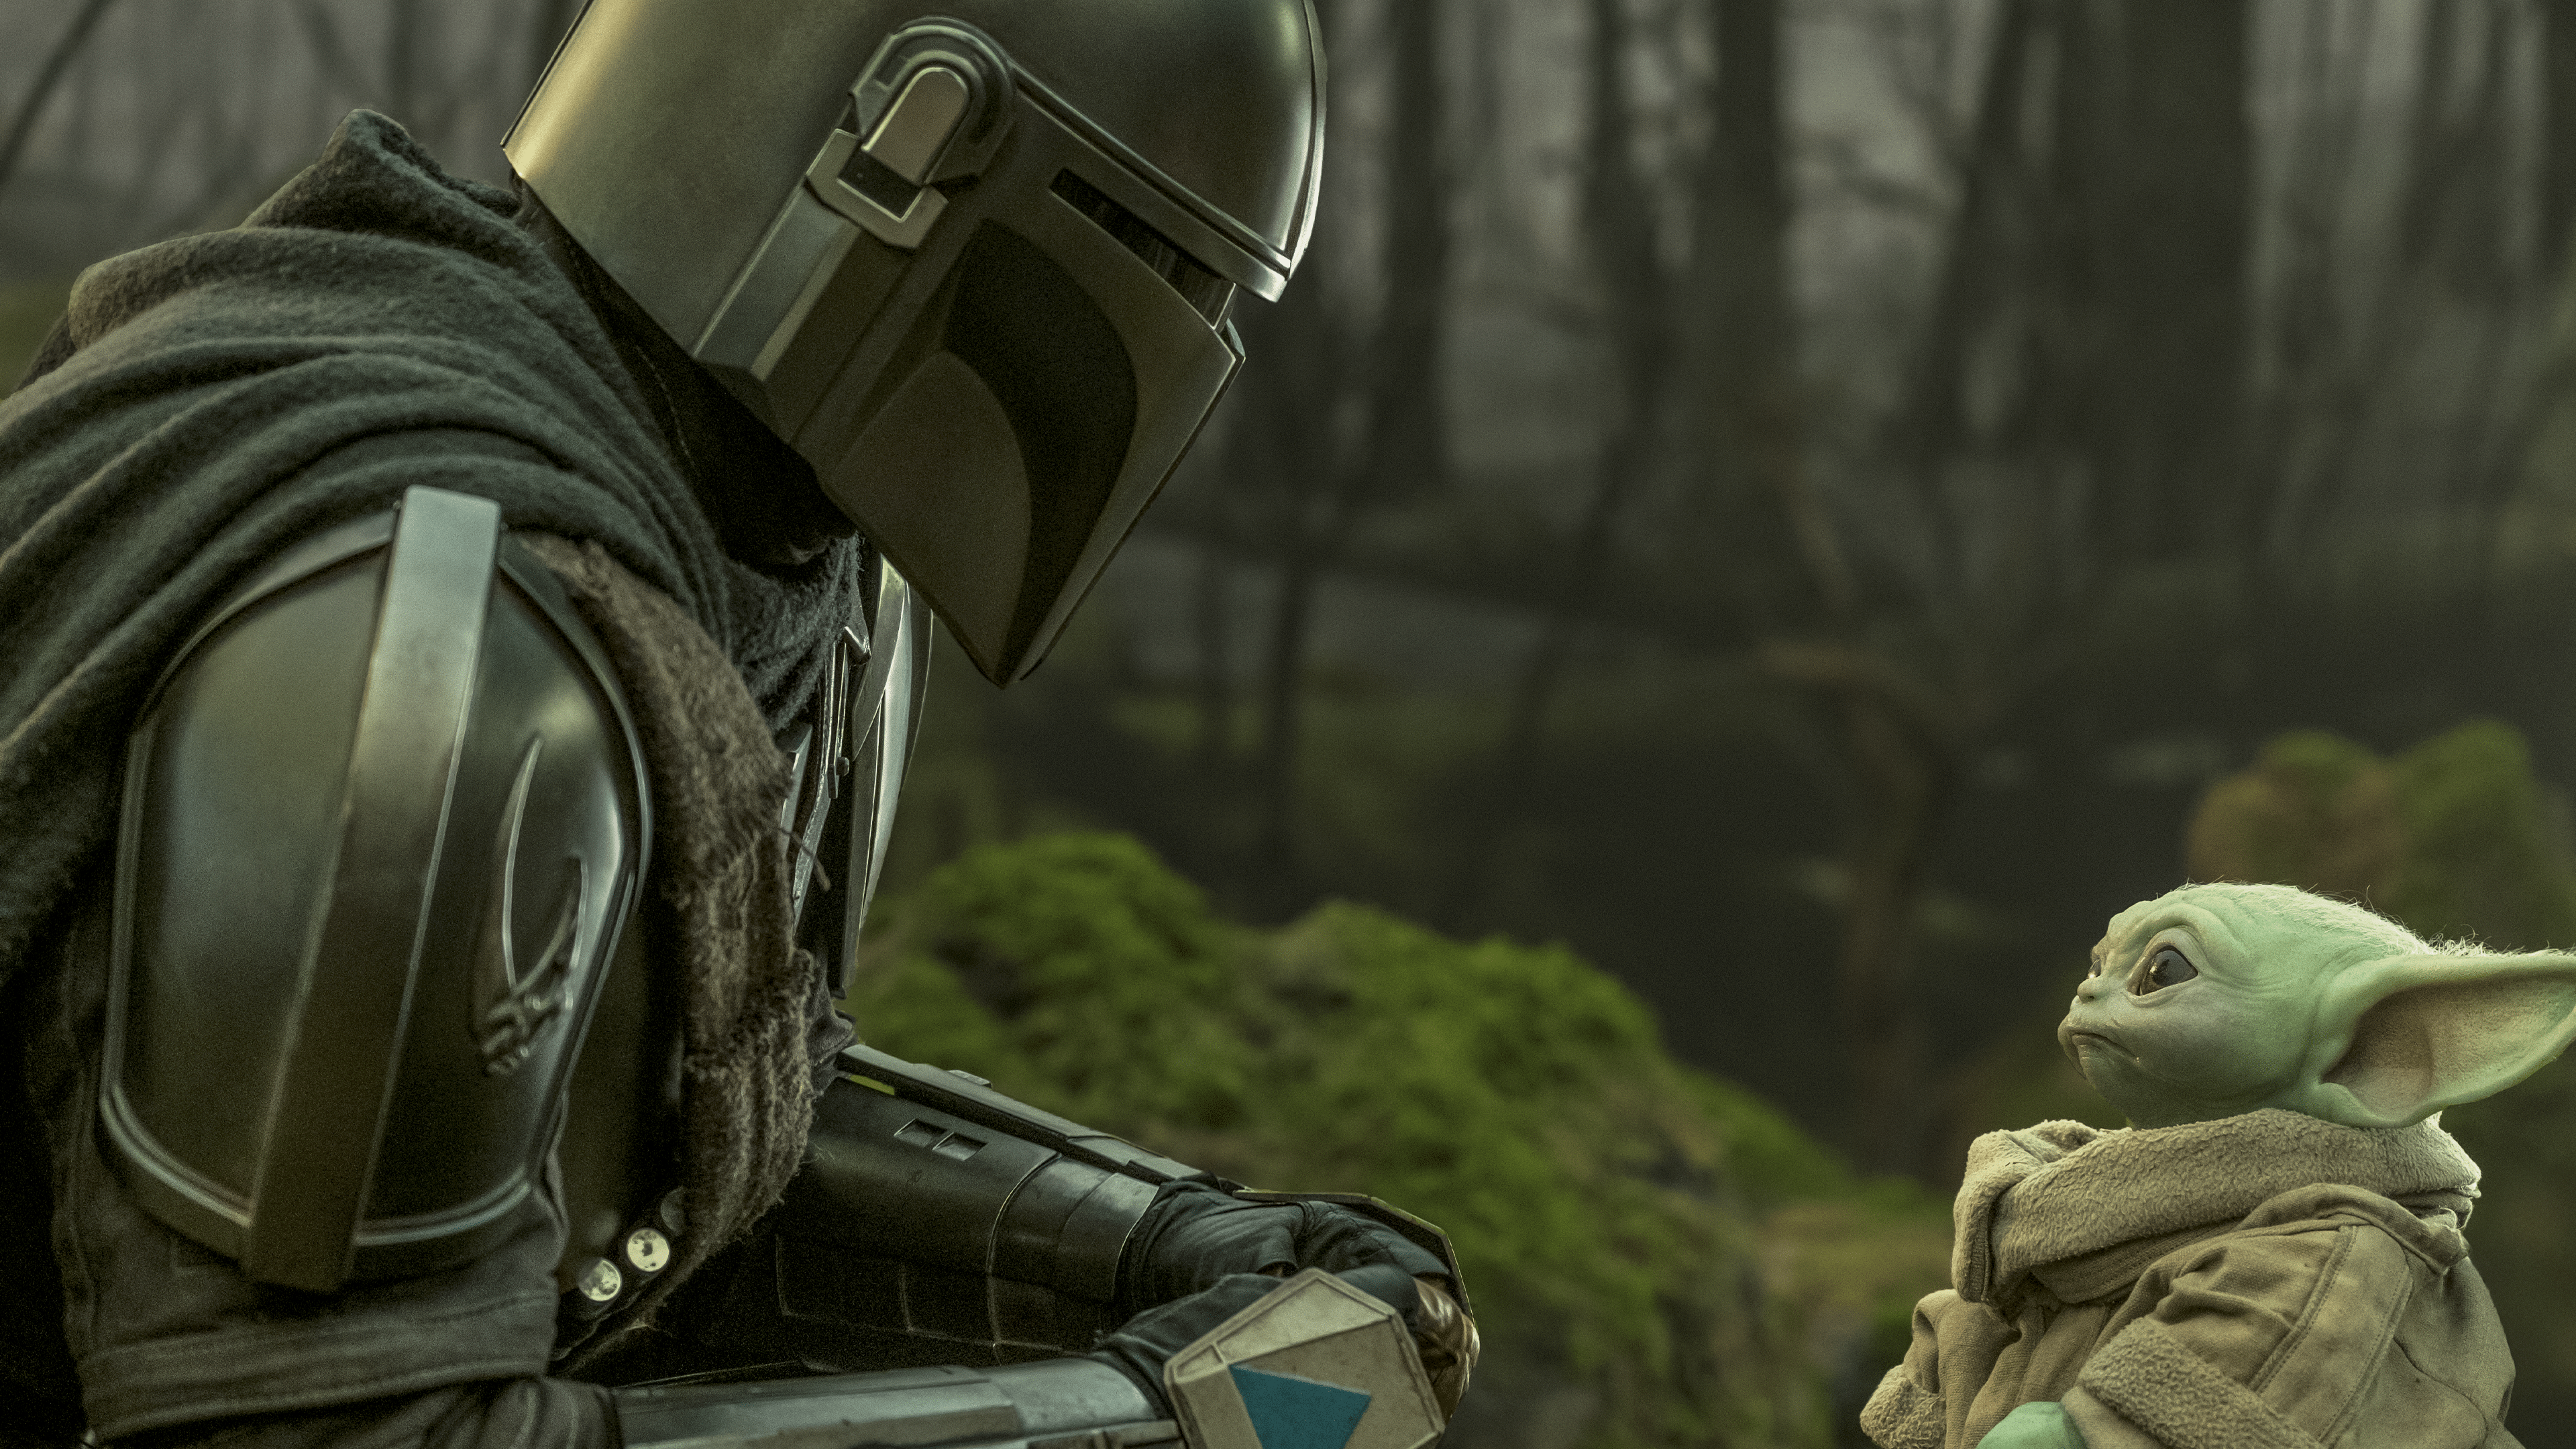 Will There Be A Season 3 Of The Mandalorian? [LRM Exclusive] And Free Talk Friday SPOILERS